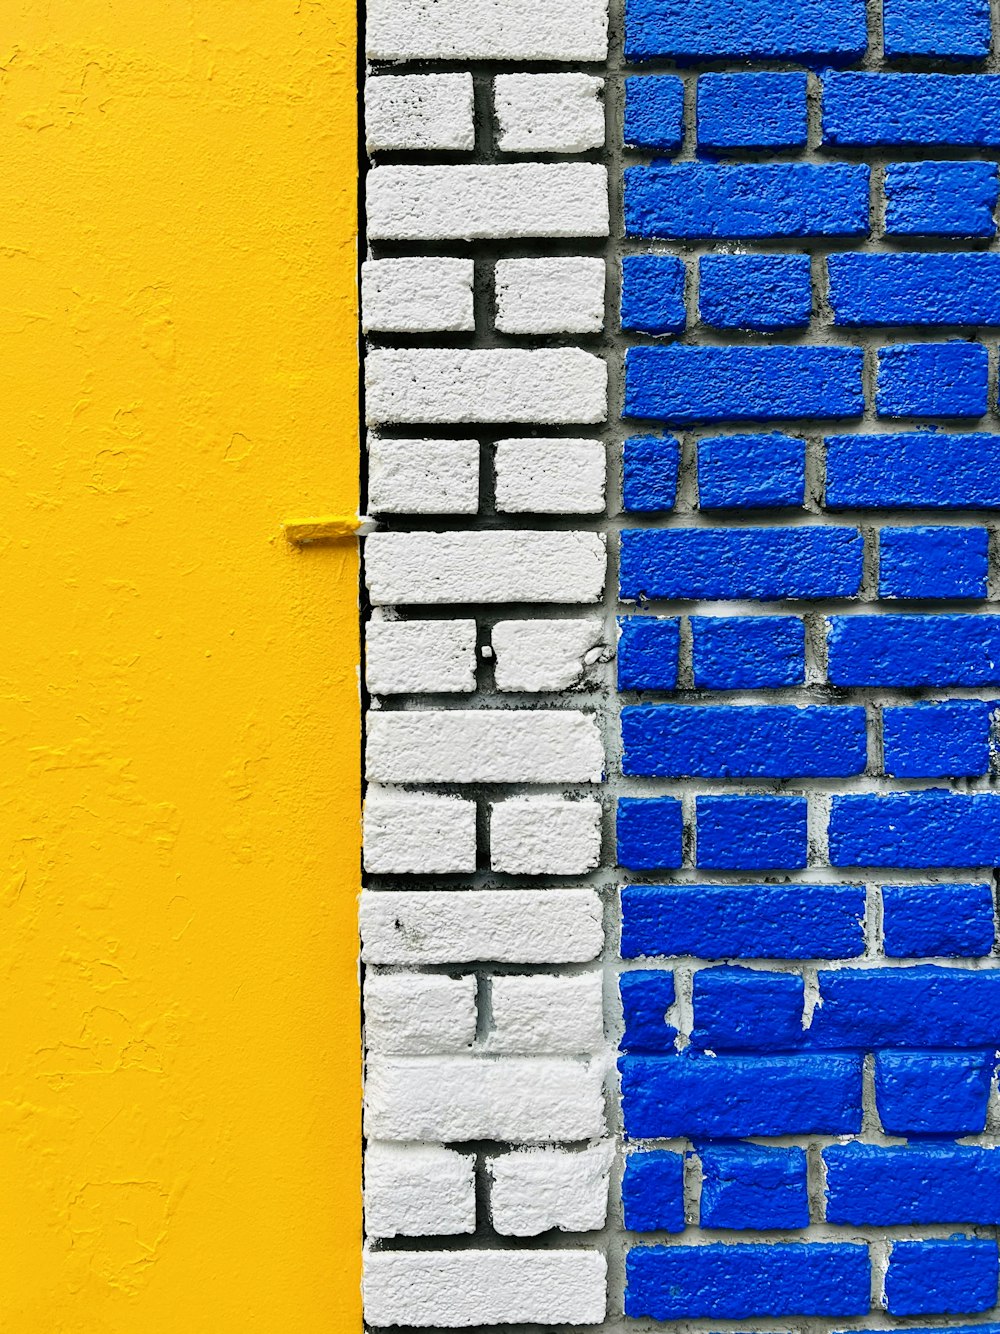 a close up of a brick wall painted blue and yellow